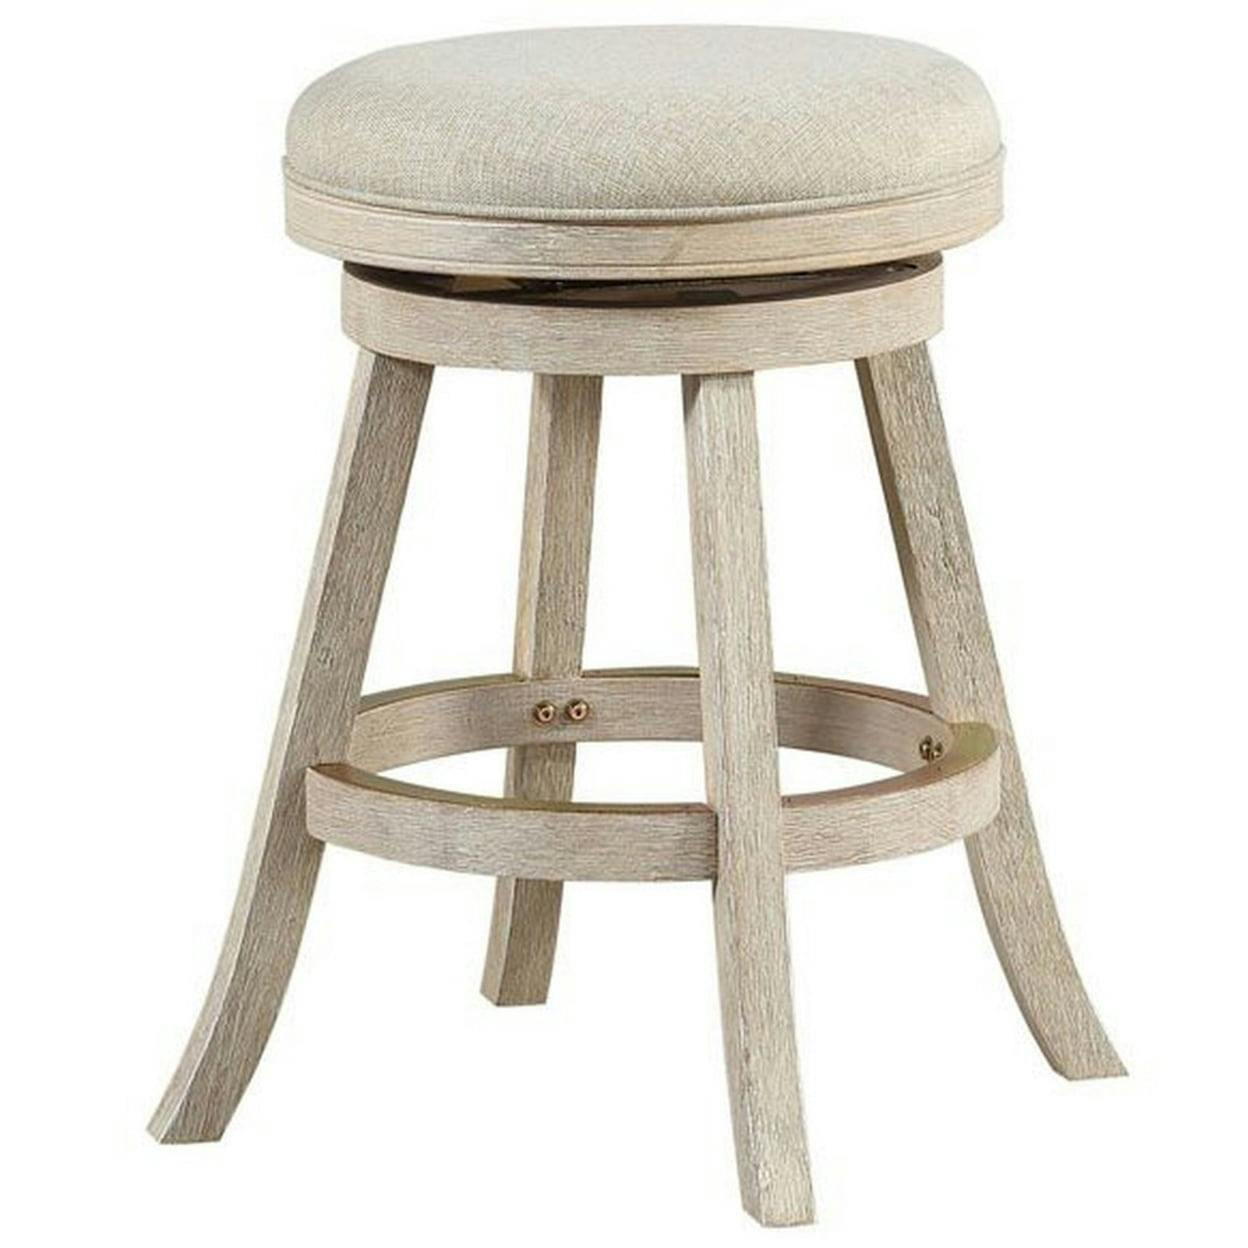 Gray Textured Fabric Swivel Counter Stool with Angled Wood Legs